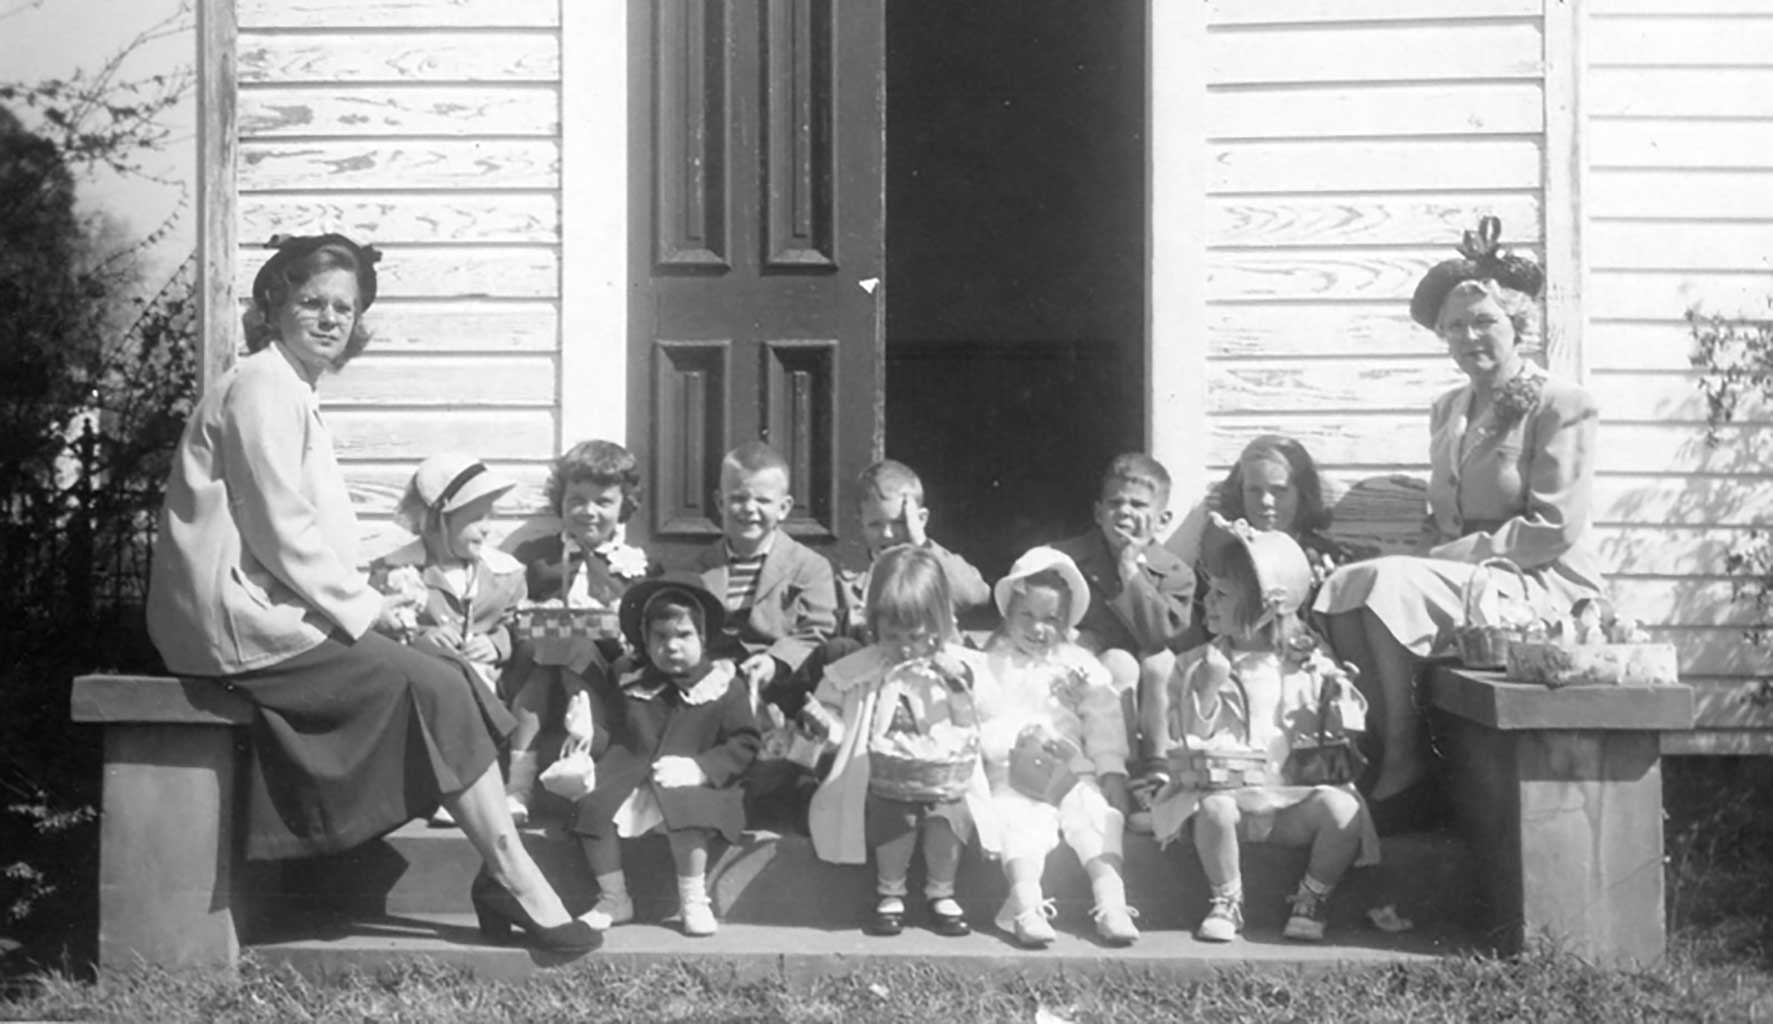 emma-spady-and-mrs-gilliam-with-kids-at-easter-1946-drex-bradshaw-3rd-from-left-img349